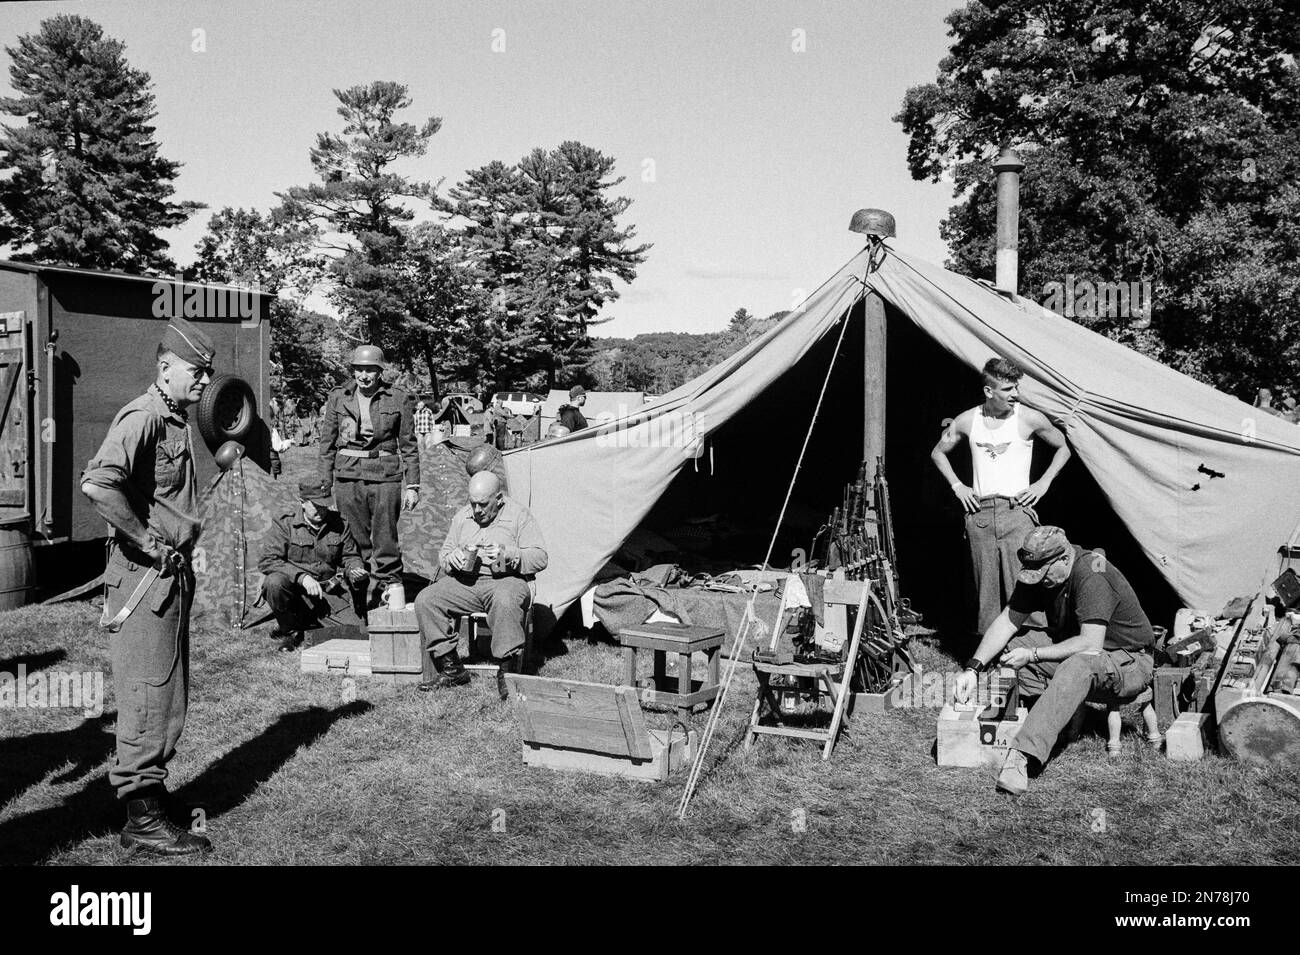 A WWII German camp with soldiers eating, working, and relaxing around a tent during a reenactment at the American Heritage Museum. The image was captu Stock Photo